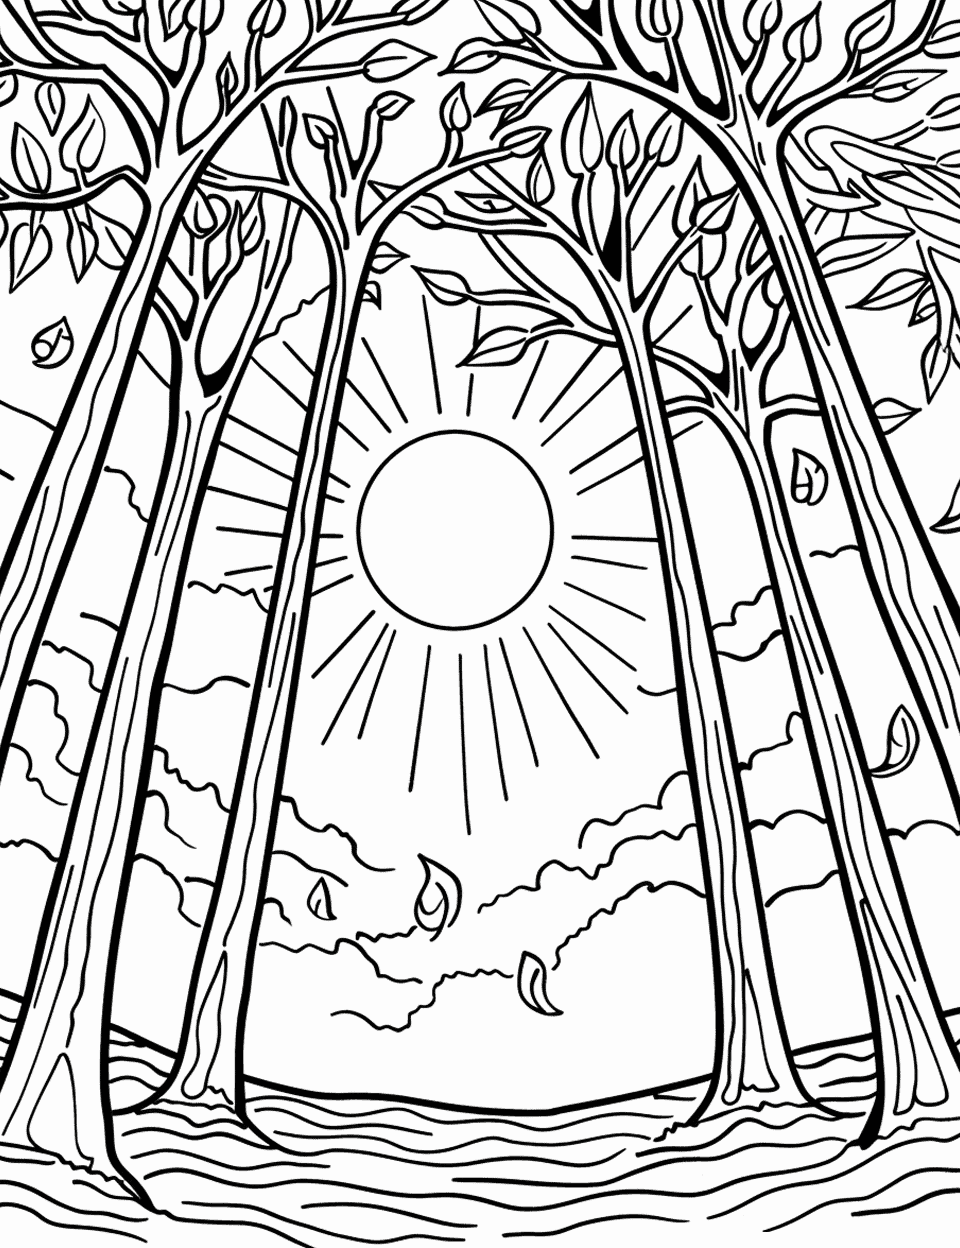 Autumn Sun Through Trees Coloring Page - The autumn sun peeking through the leaves of a forest.